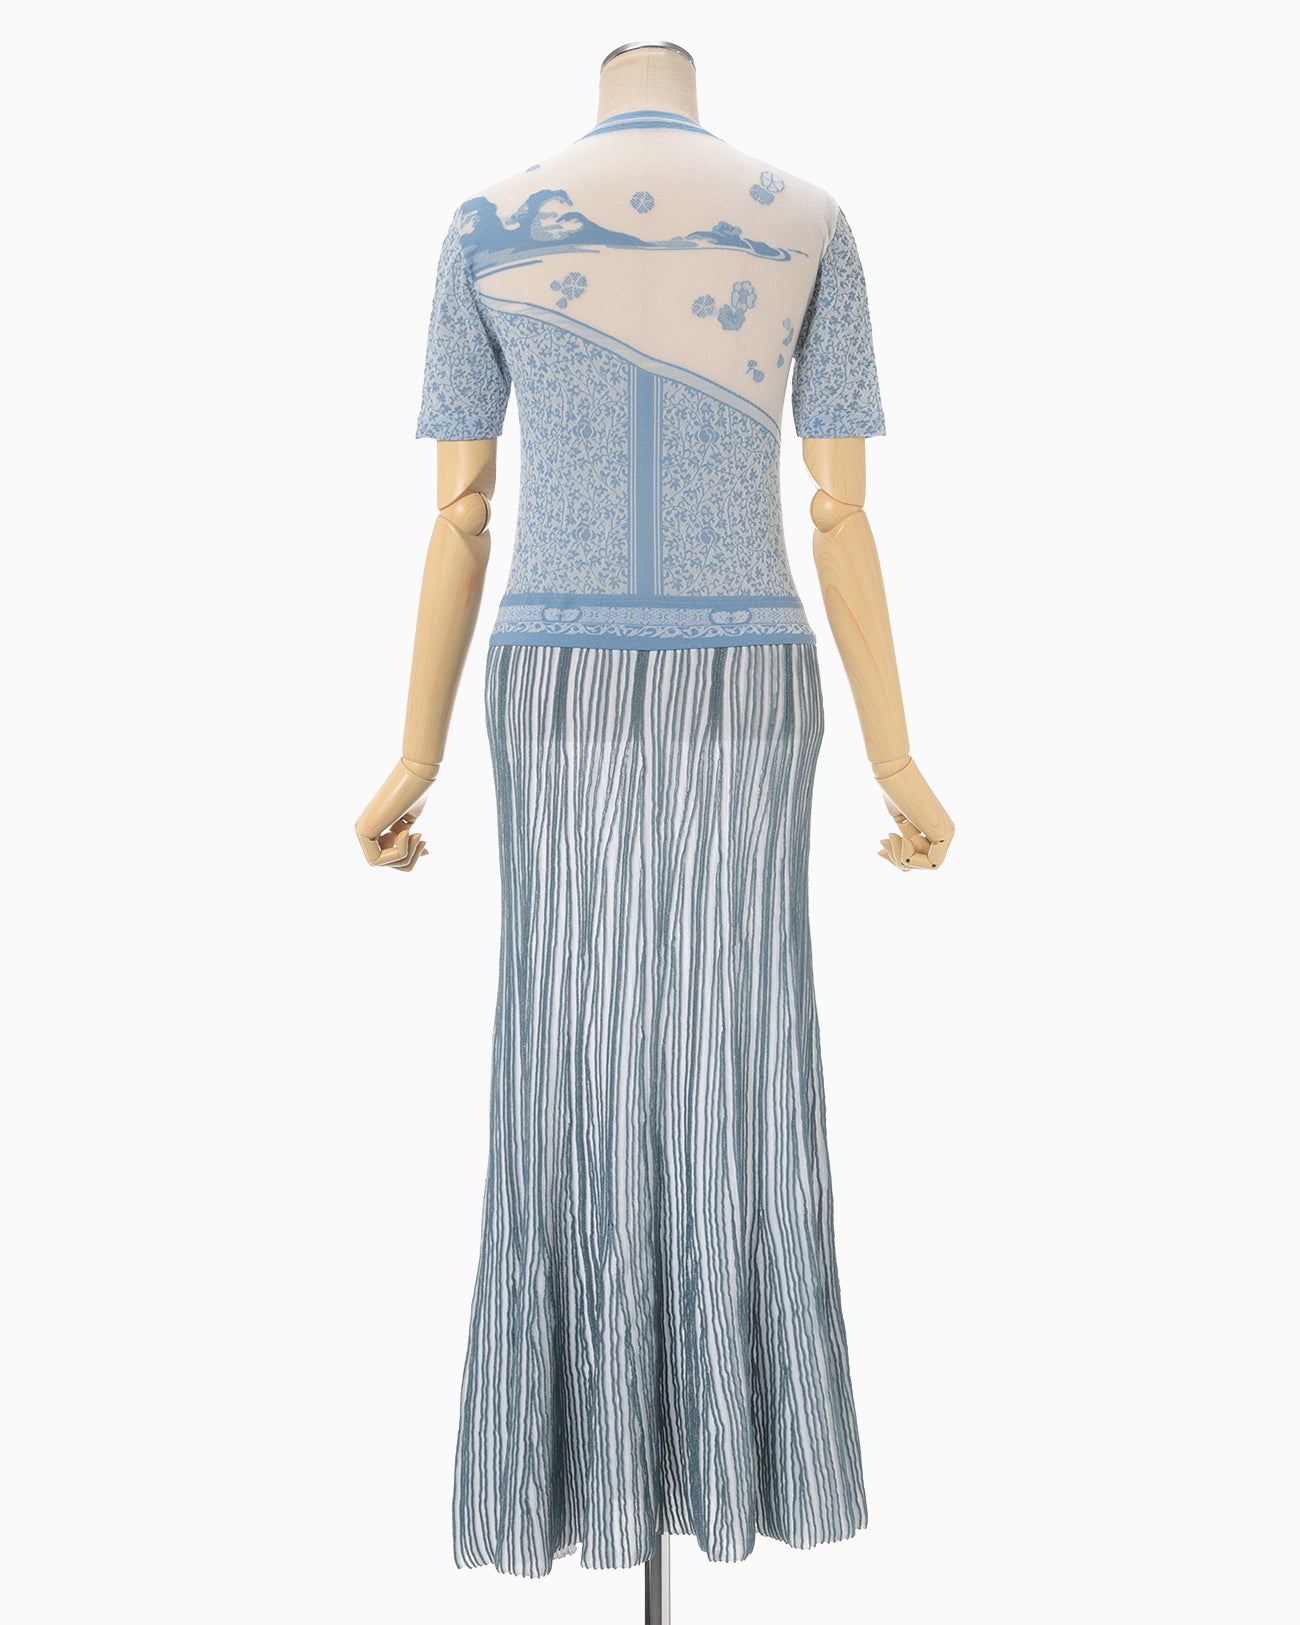 Landscape Graphic Sheer Knitted Dress - blue